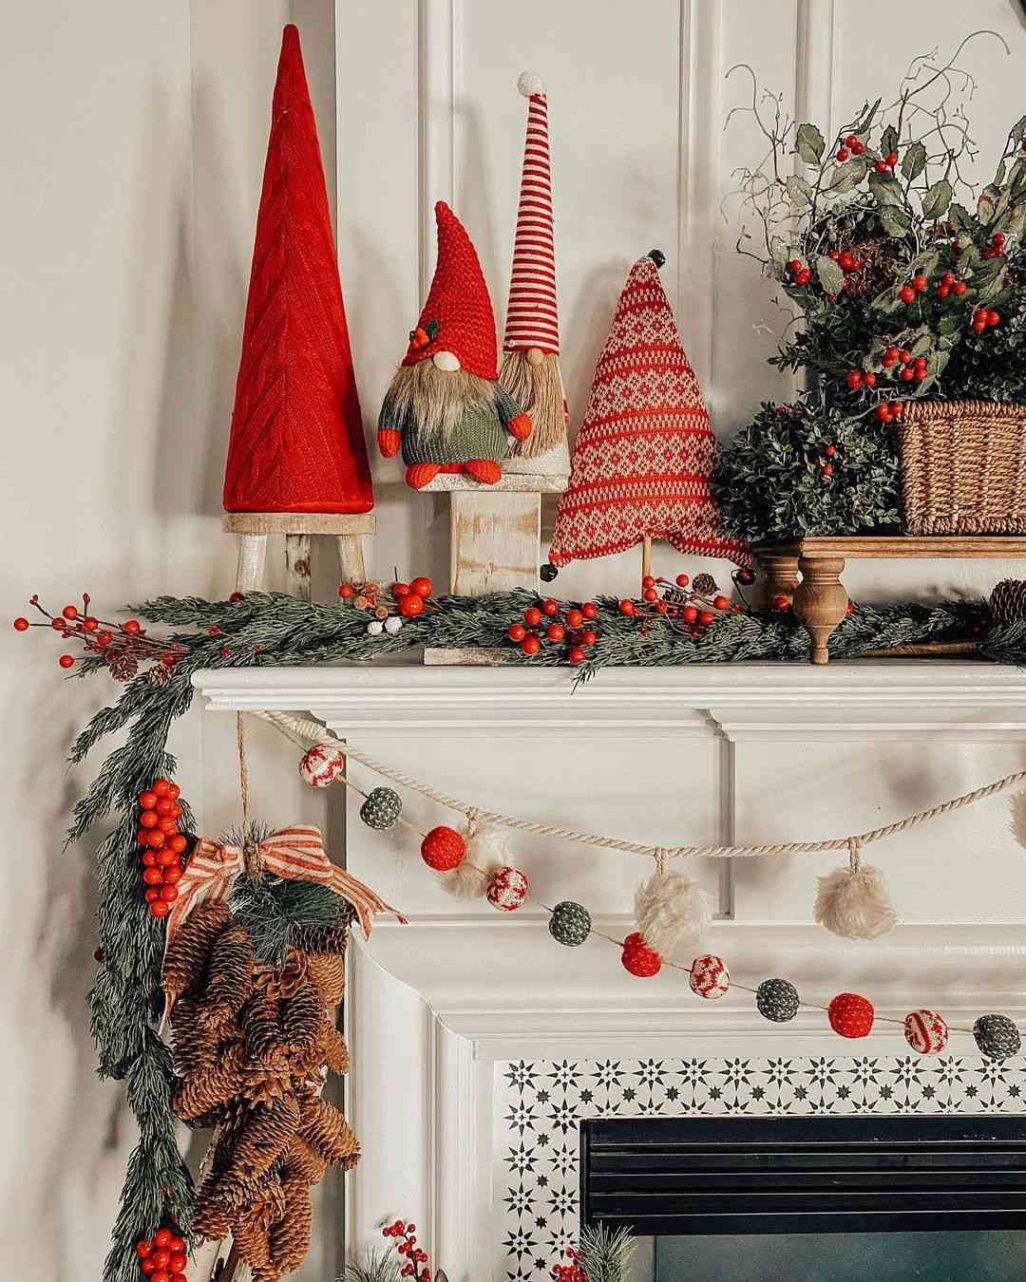 Spruce Up Your Mantel: Festive Xmas Decorating Ideas For A Cozy Holiday Vibe!